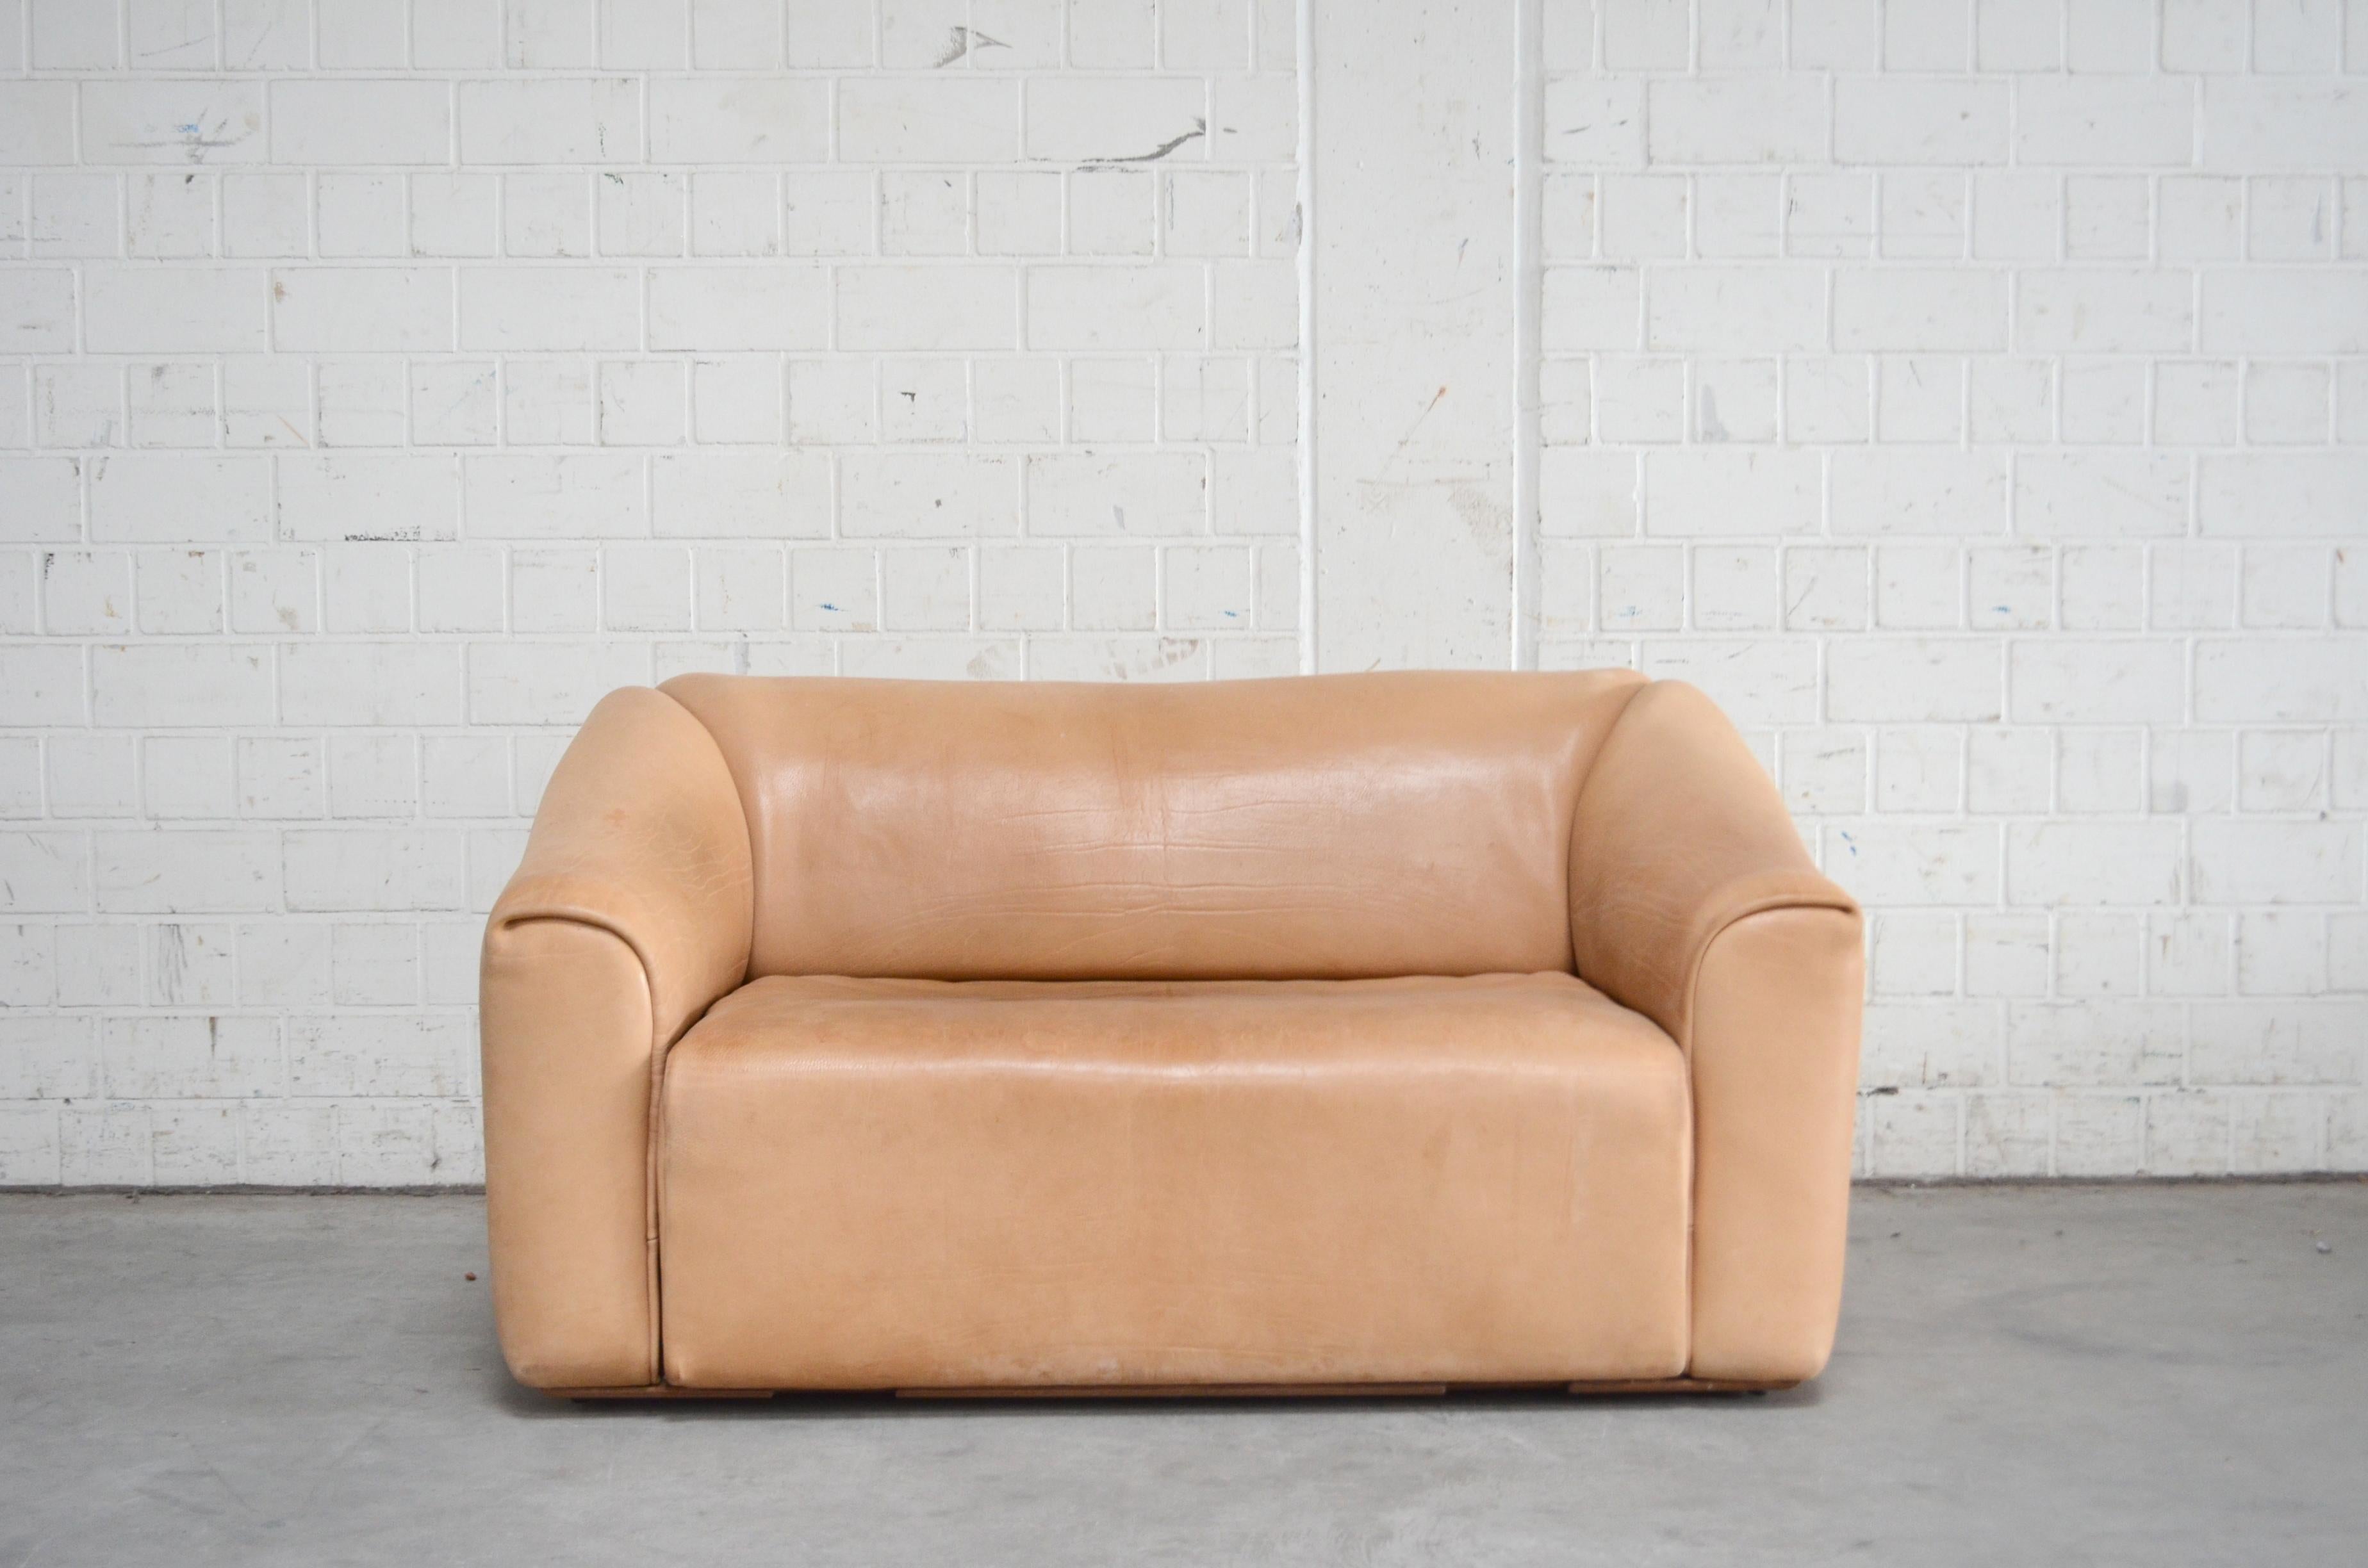 De Sede DS 47 / 02 neck leather sofa.
It´s the small loveseat Sofa.
This DS-47 sofa was manufactured in Switzerland by De Sede and is upholstered in 3-5 mm thick, natural hide.
The leather color is beautiful with name Cocos
and has some little